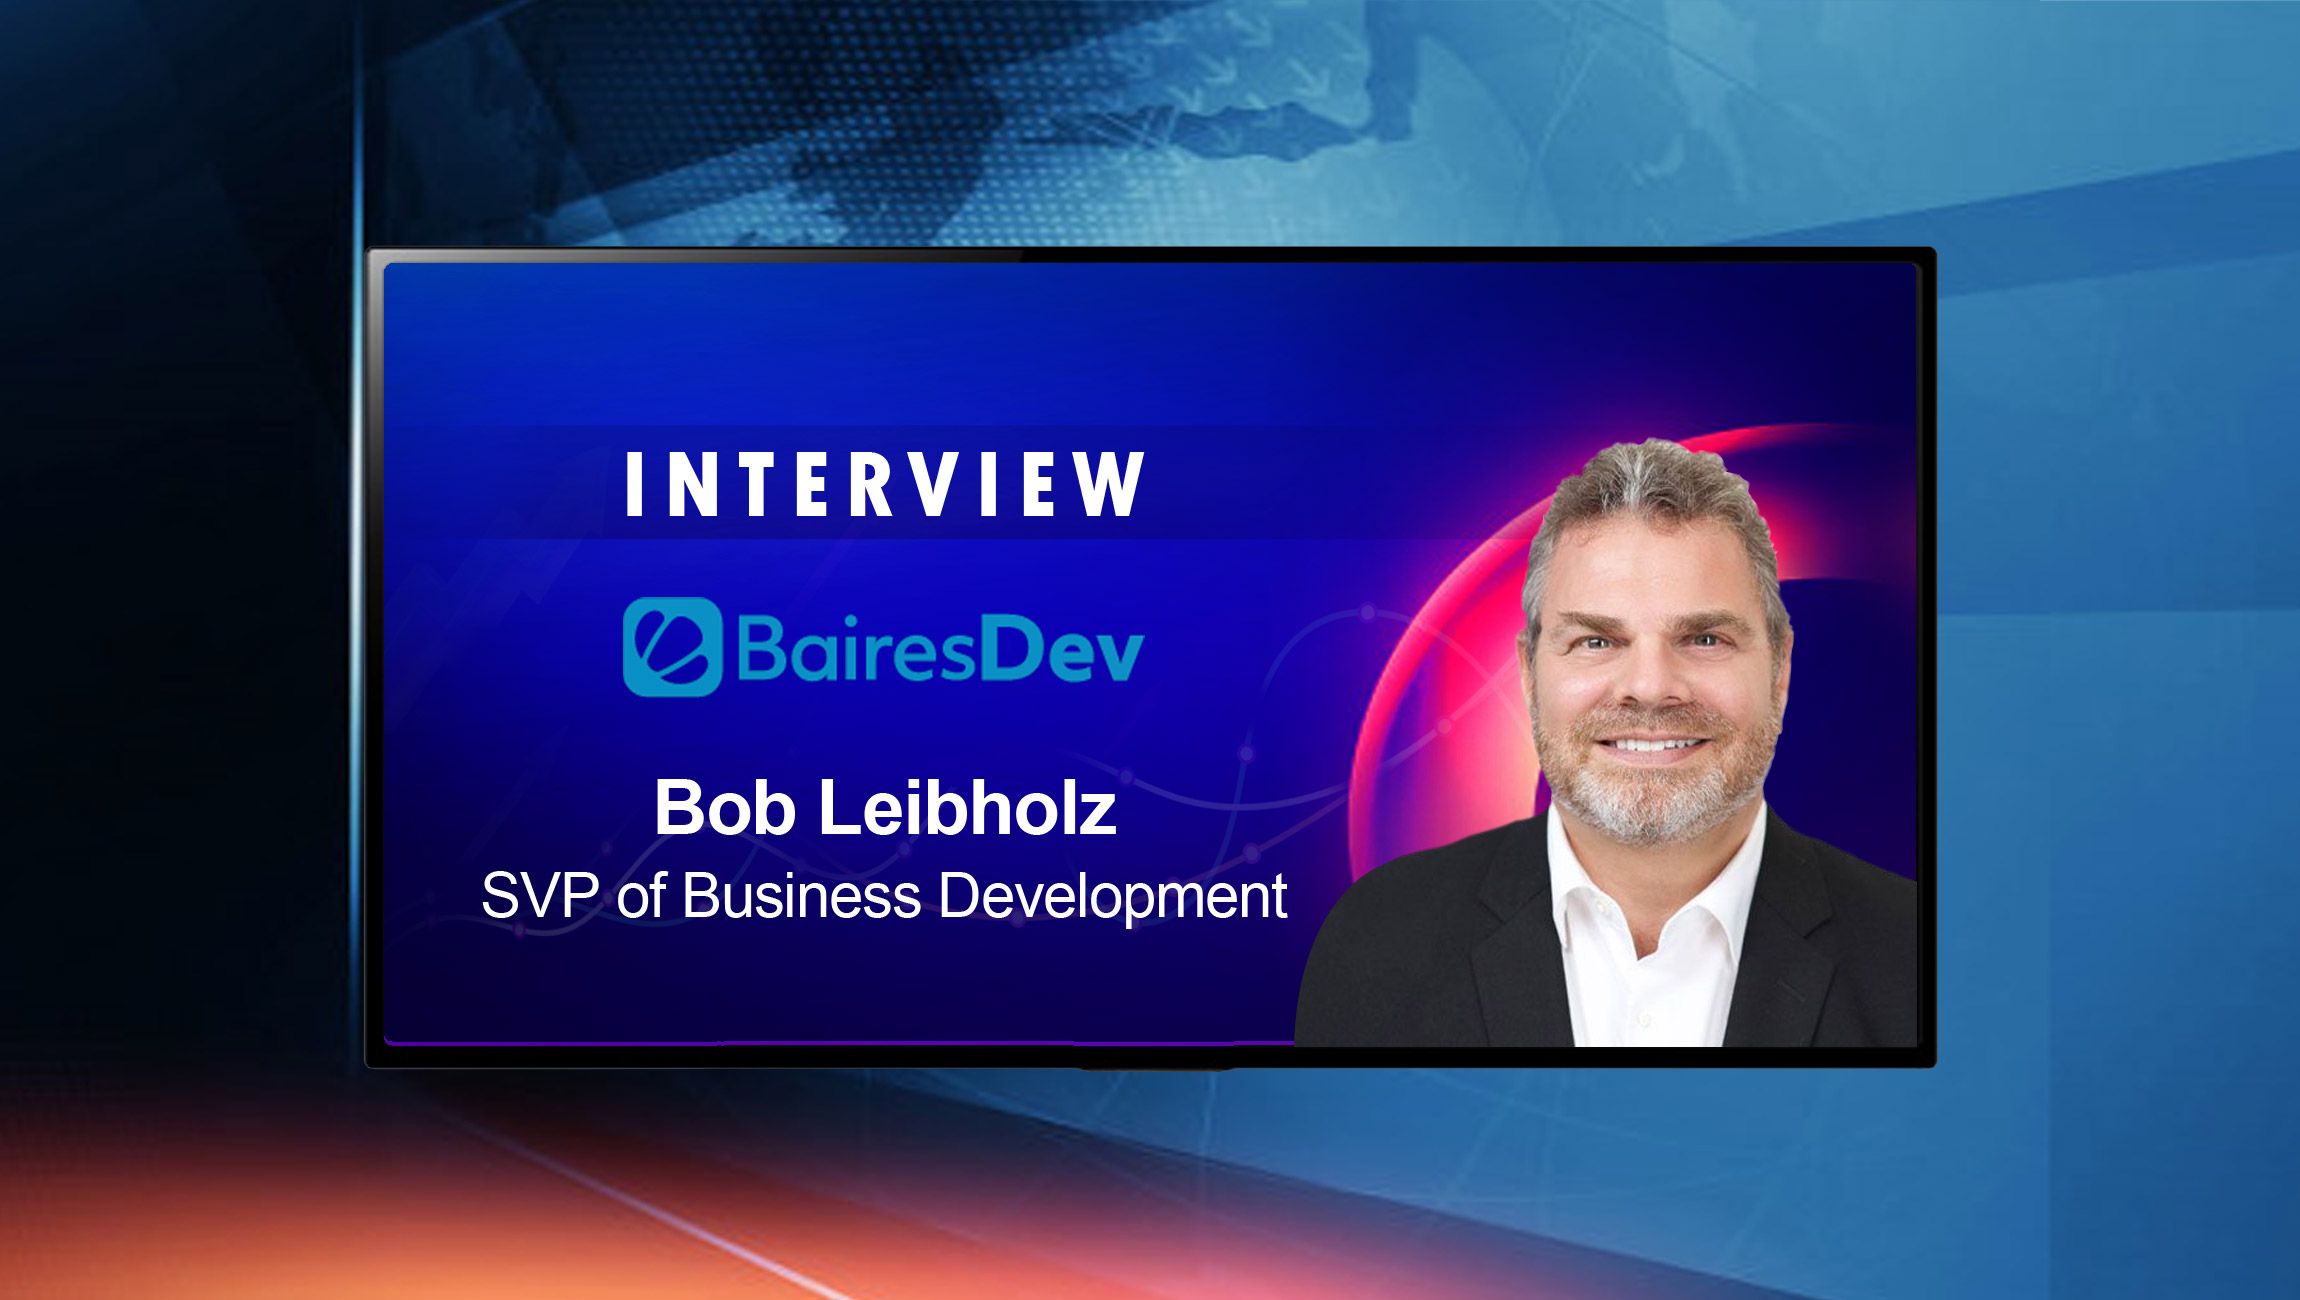 SalesTechStar Interview with Bob Leibholz at BairesDev 